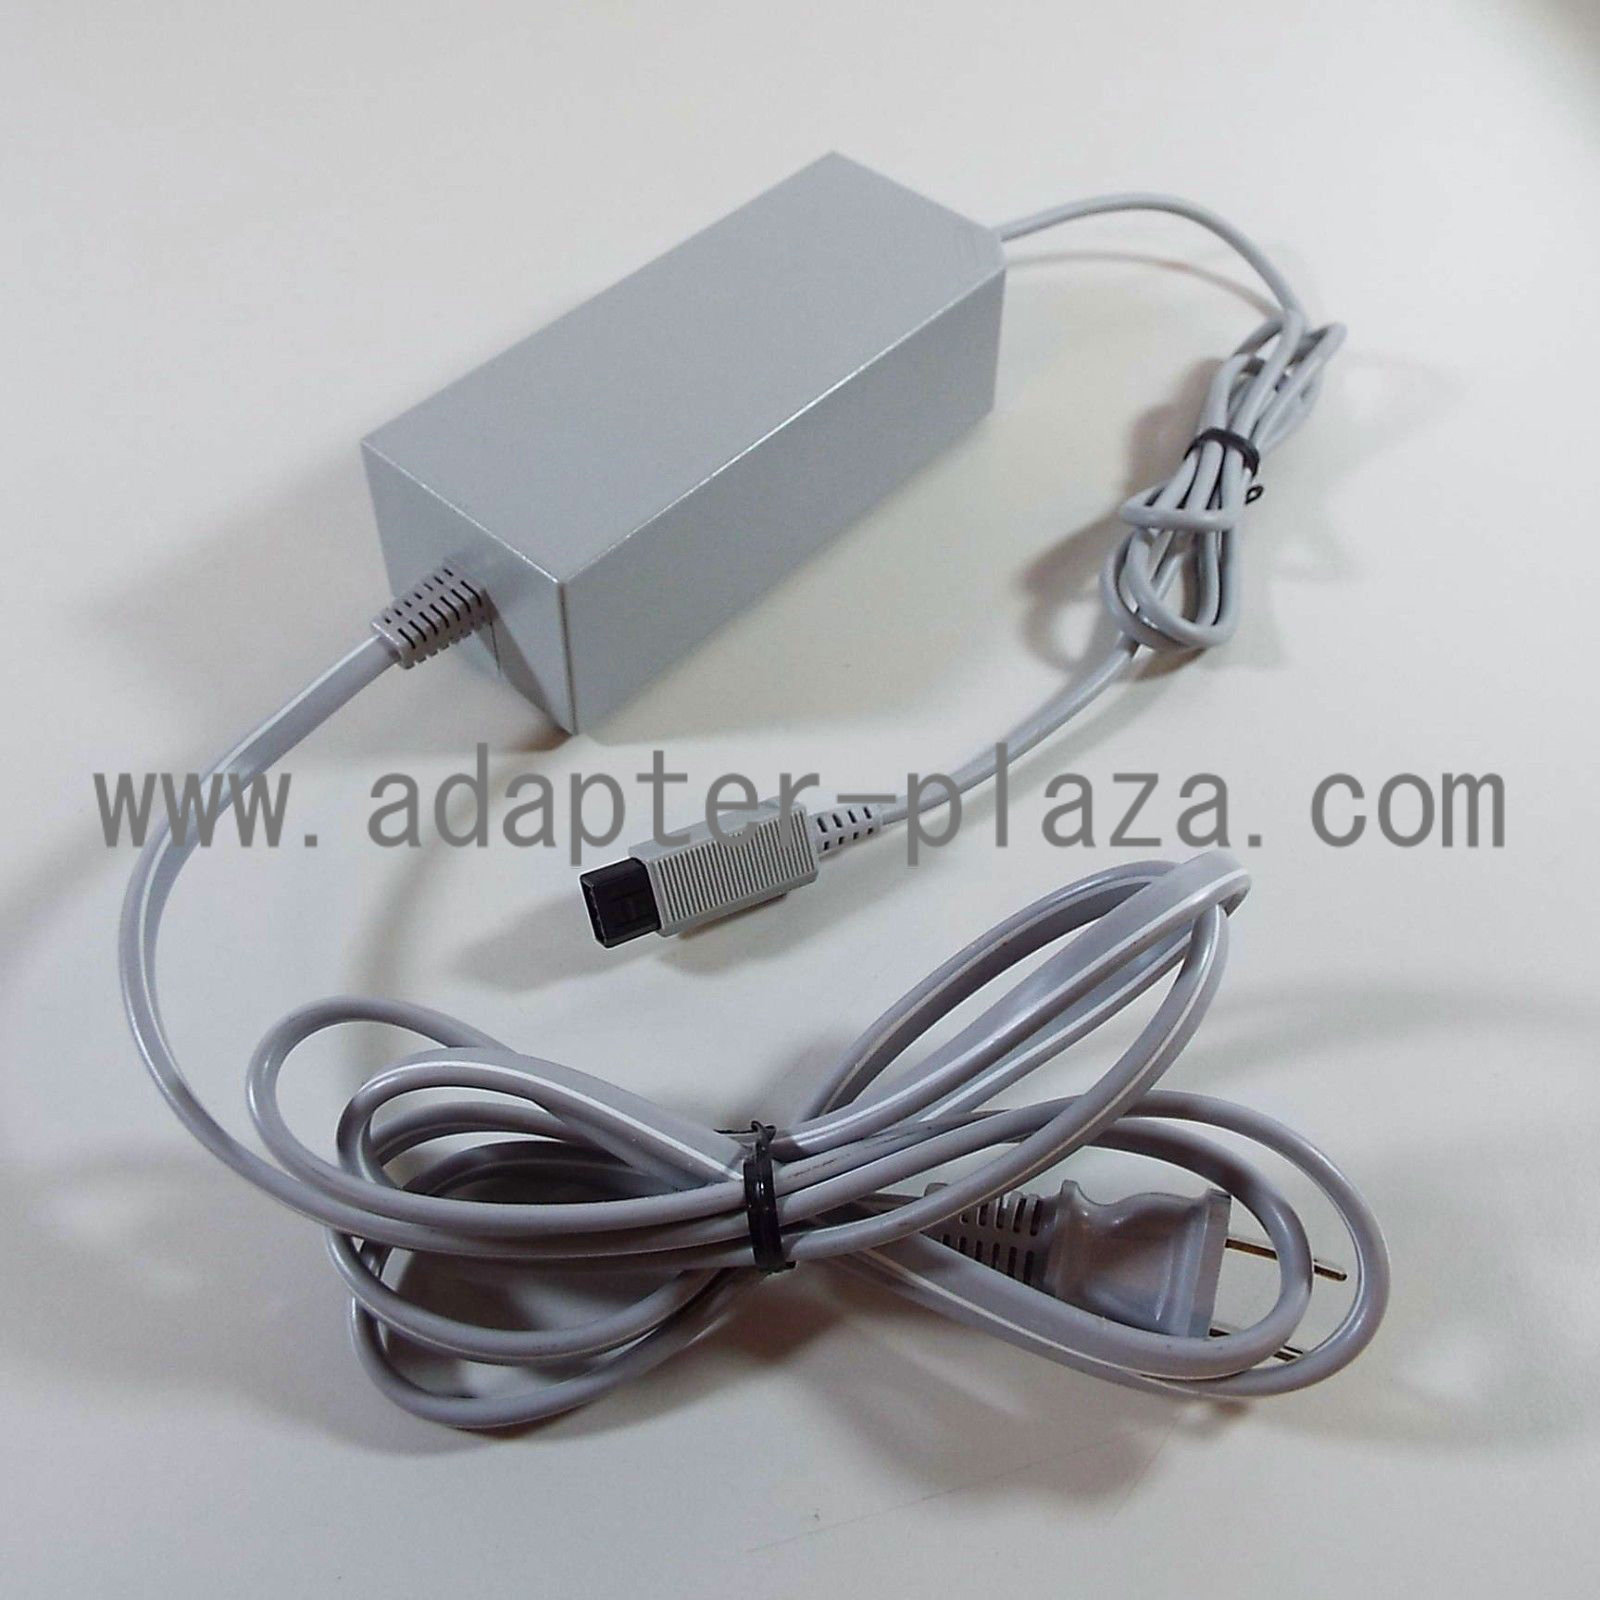 *Brand NEW* Wii RVL-002 DC12V 3.7A AC DC Adapter POWER SUPPLY